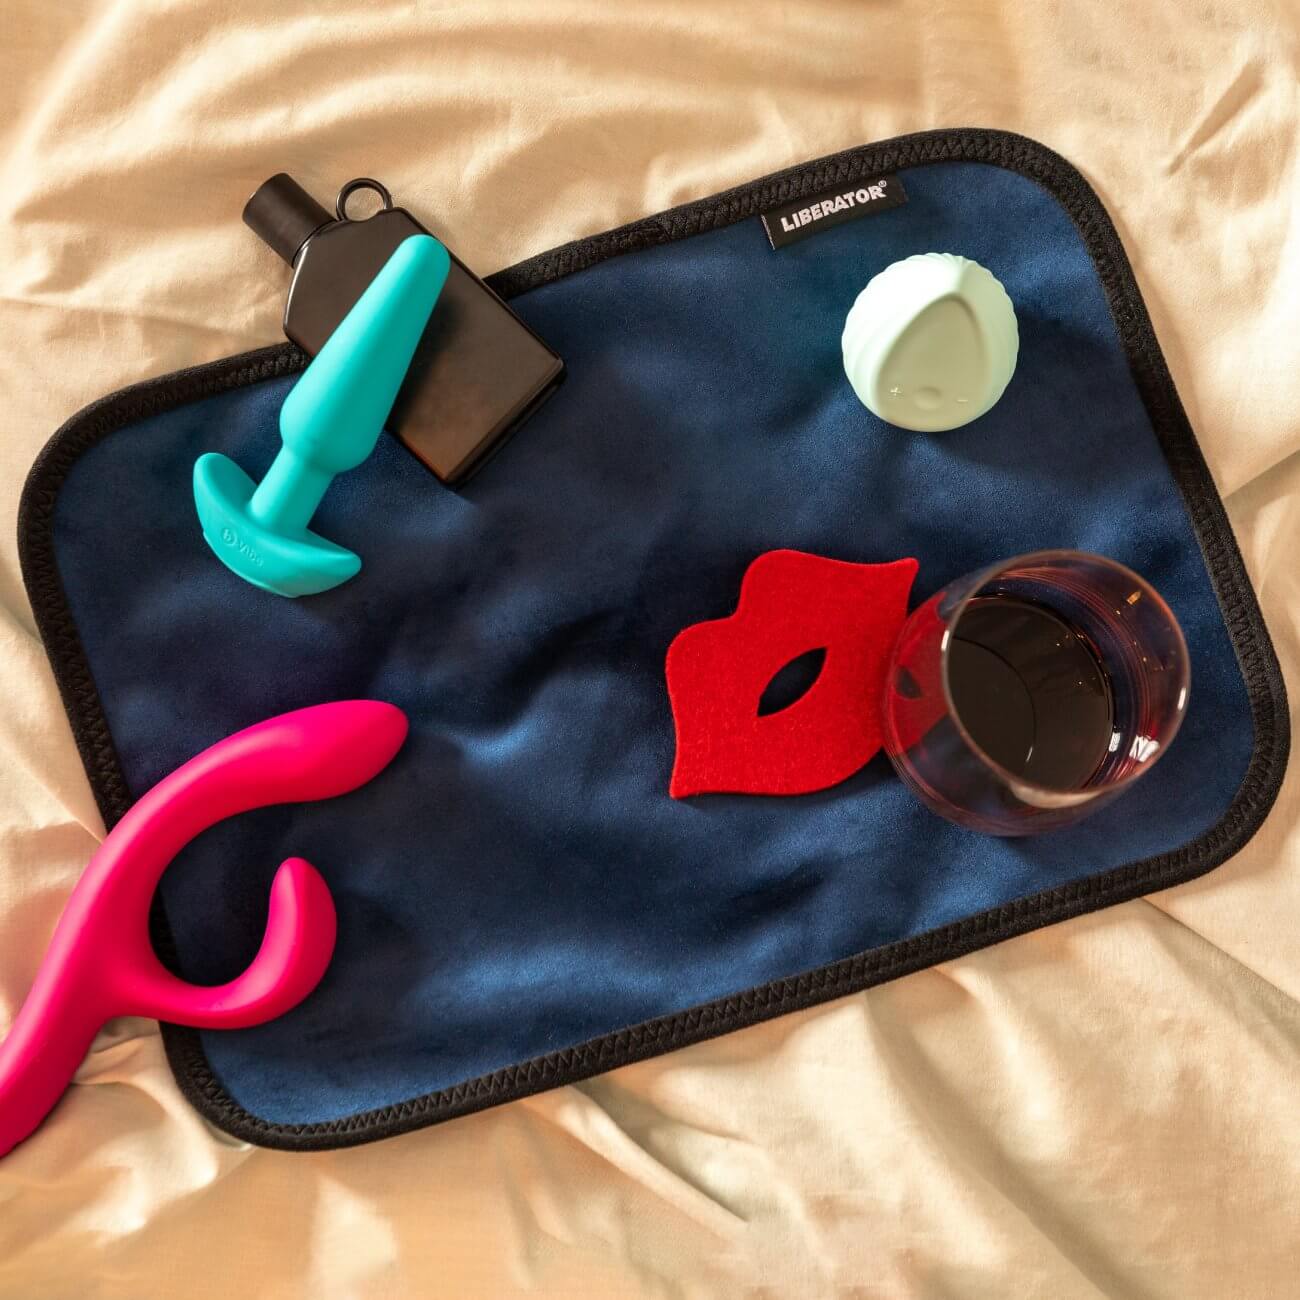 Three sex toys, a bottle of lube, a coaster, and a glass of wine all sit out on top of the Liberator Fascinator Toy Pad. There's still a ton of extra room for additional items. | Kinkly Shop